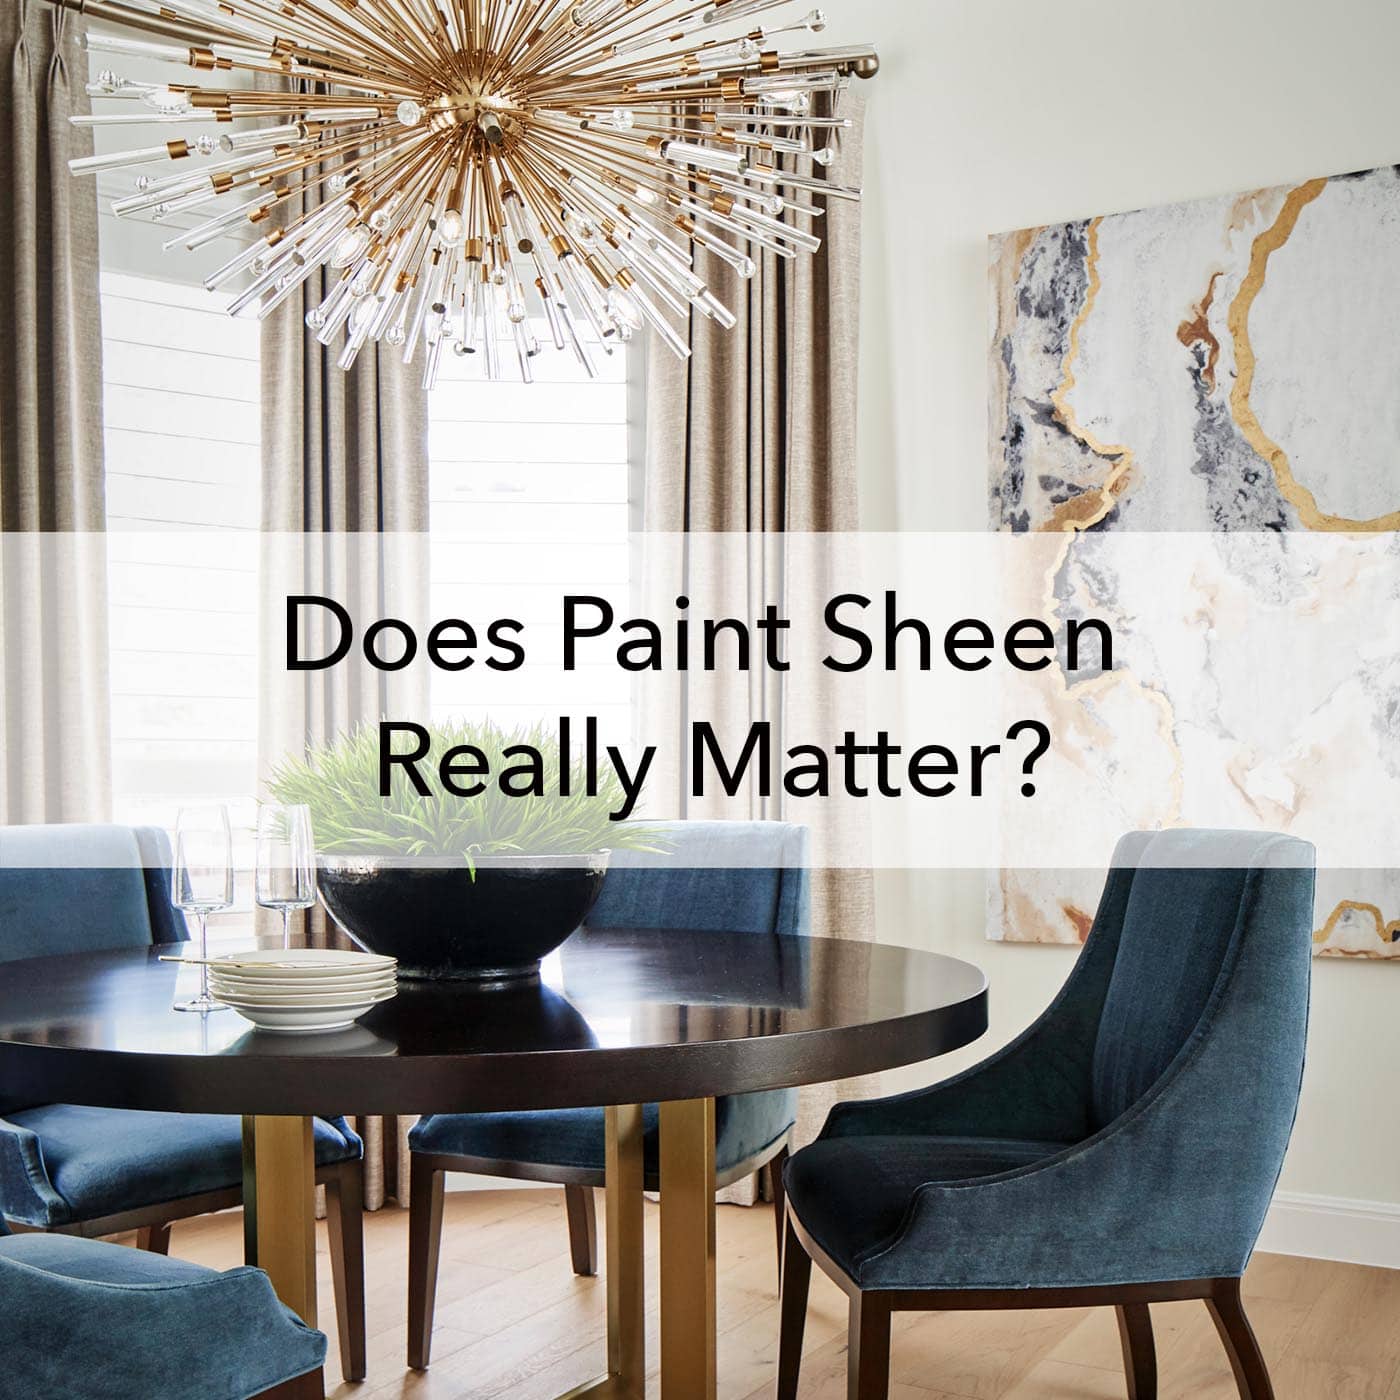 does-paint-sheen-really-matter